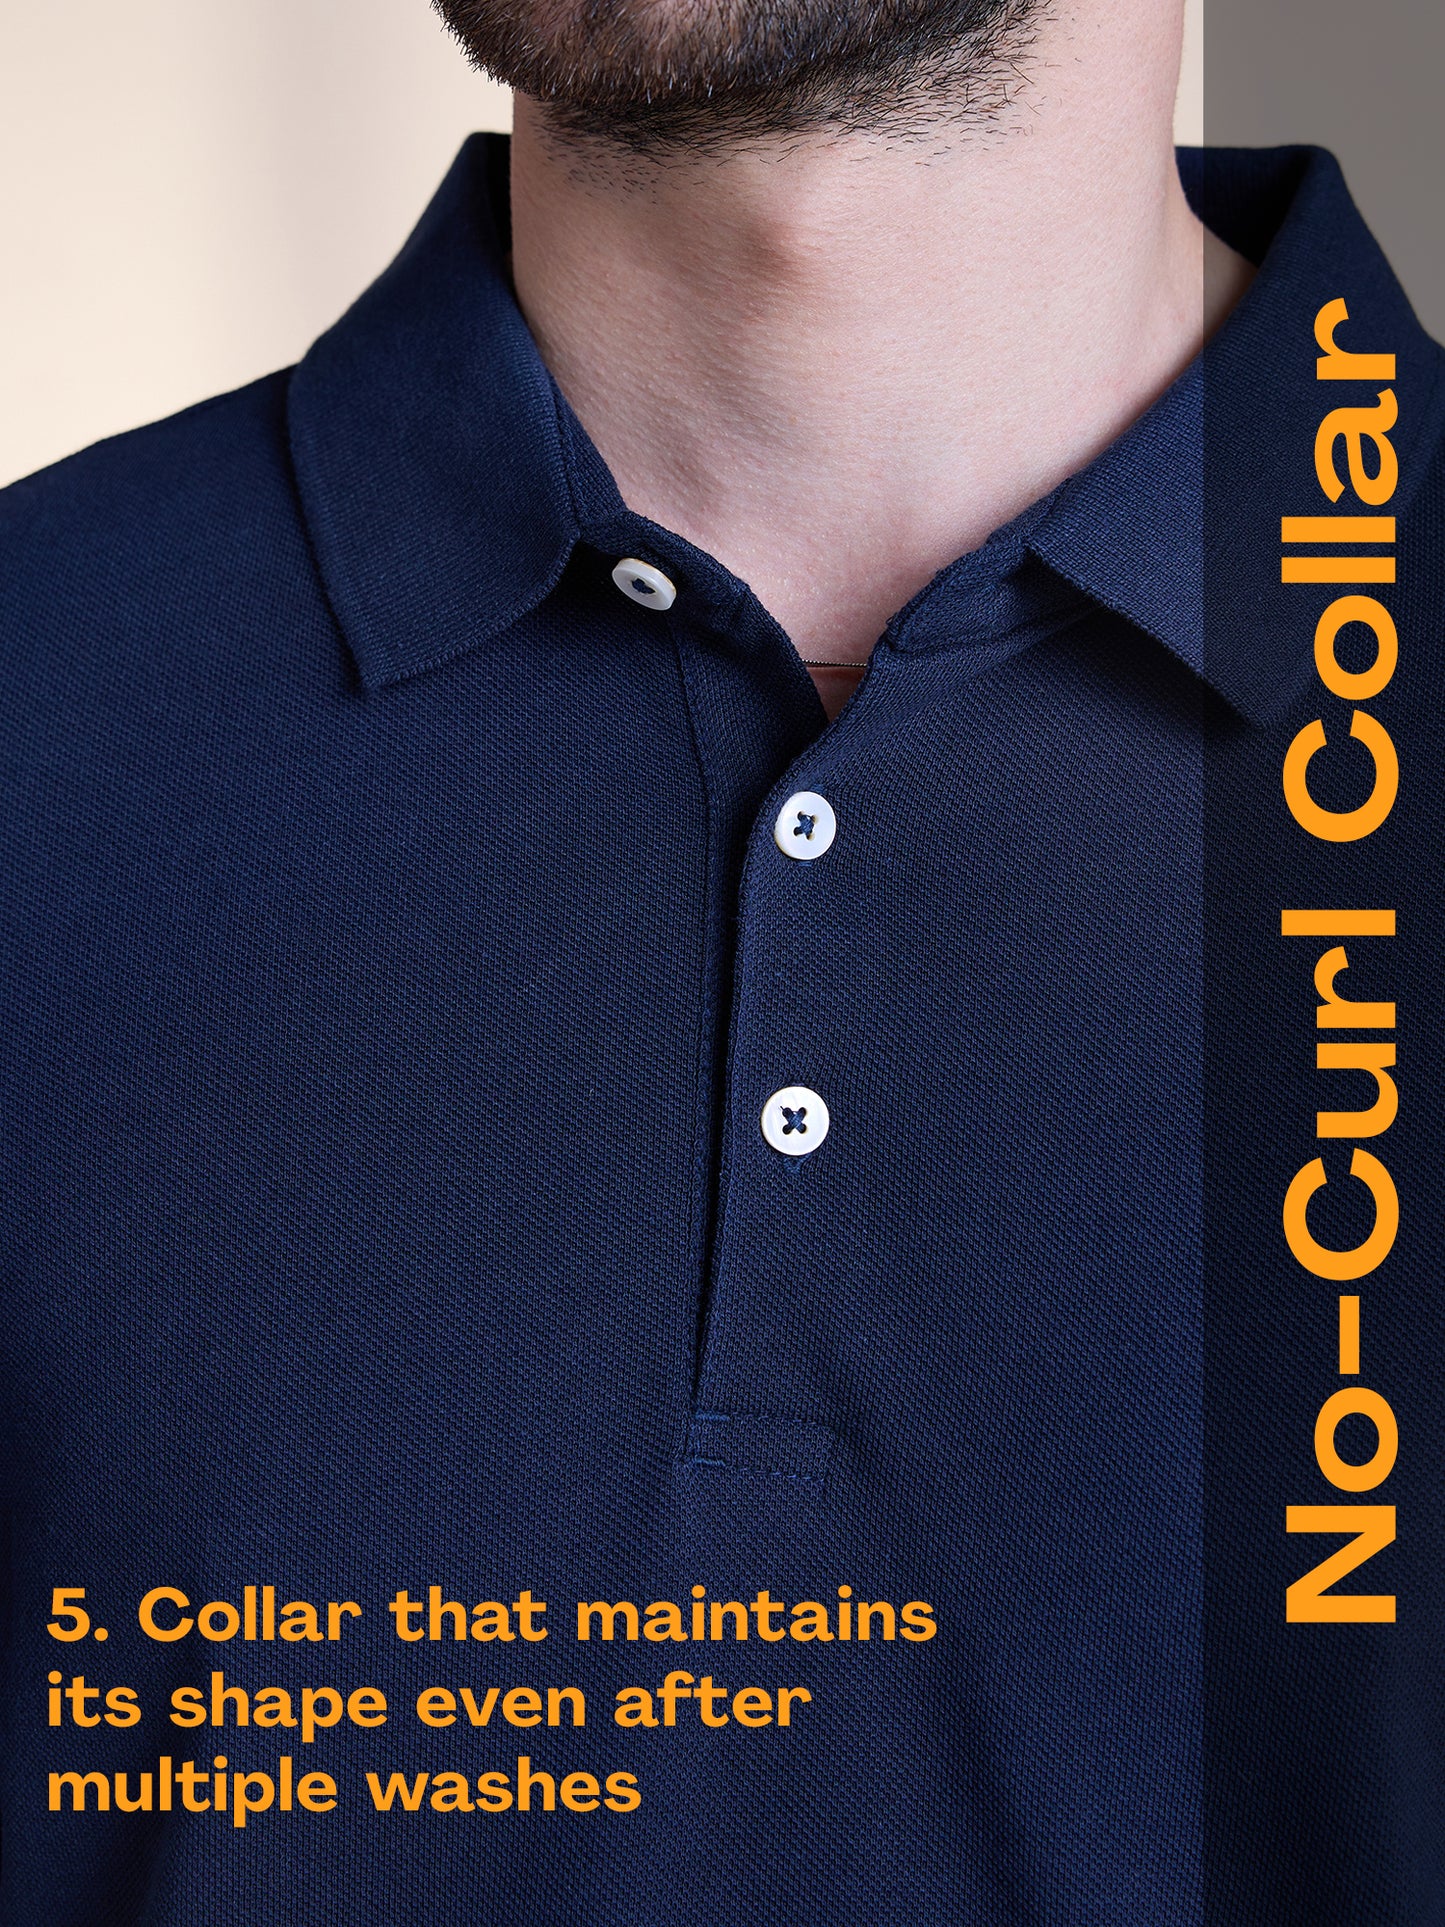 Anti Stain & Anti Odor Cotton Polo with No - Curl Collar - True Navy